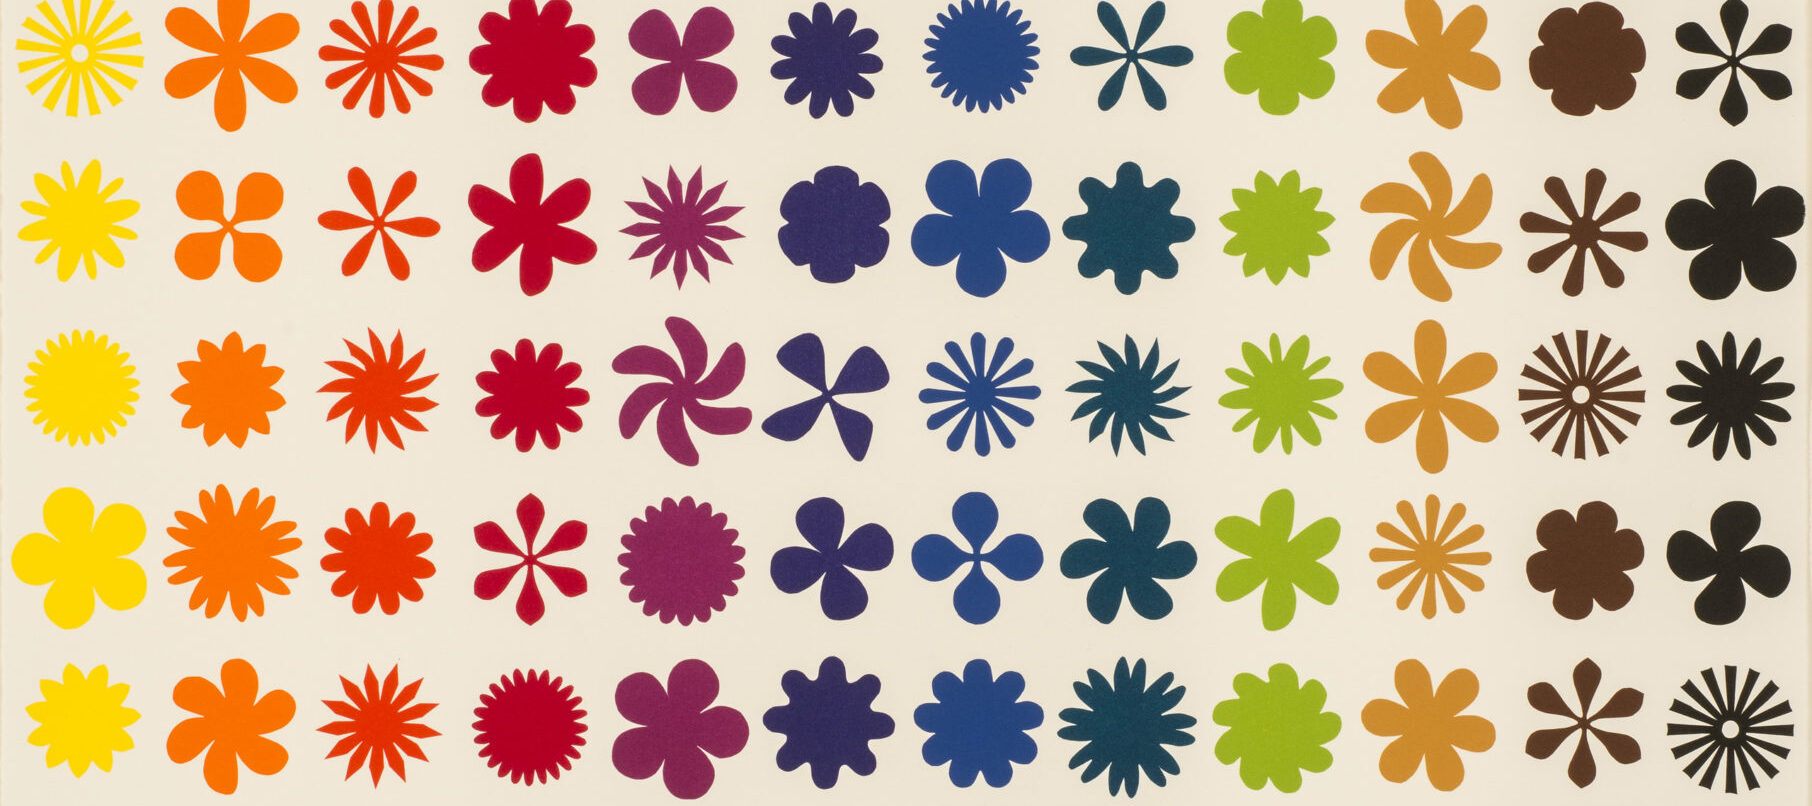 Twelve vertical columns—each a different color— of repeating flower, pinwheel, and starburst shapes on a white background.